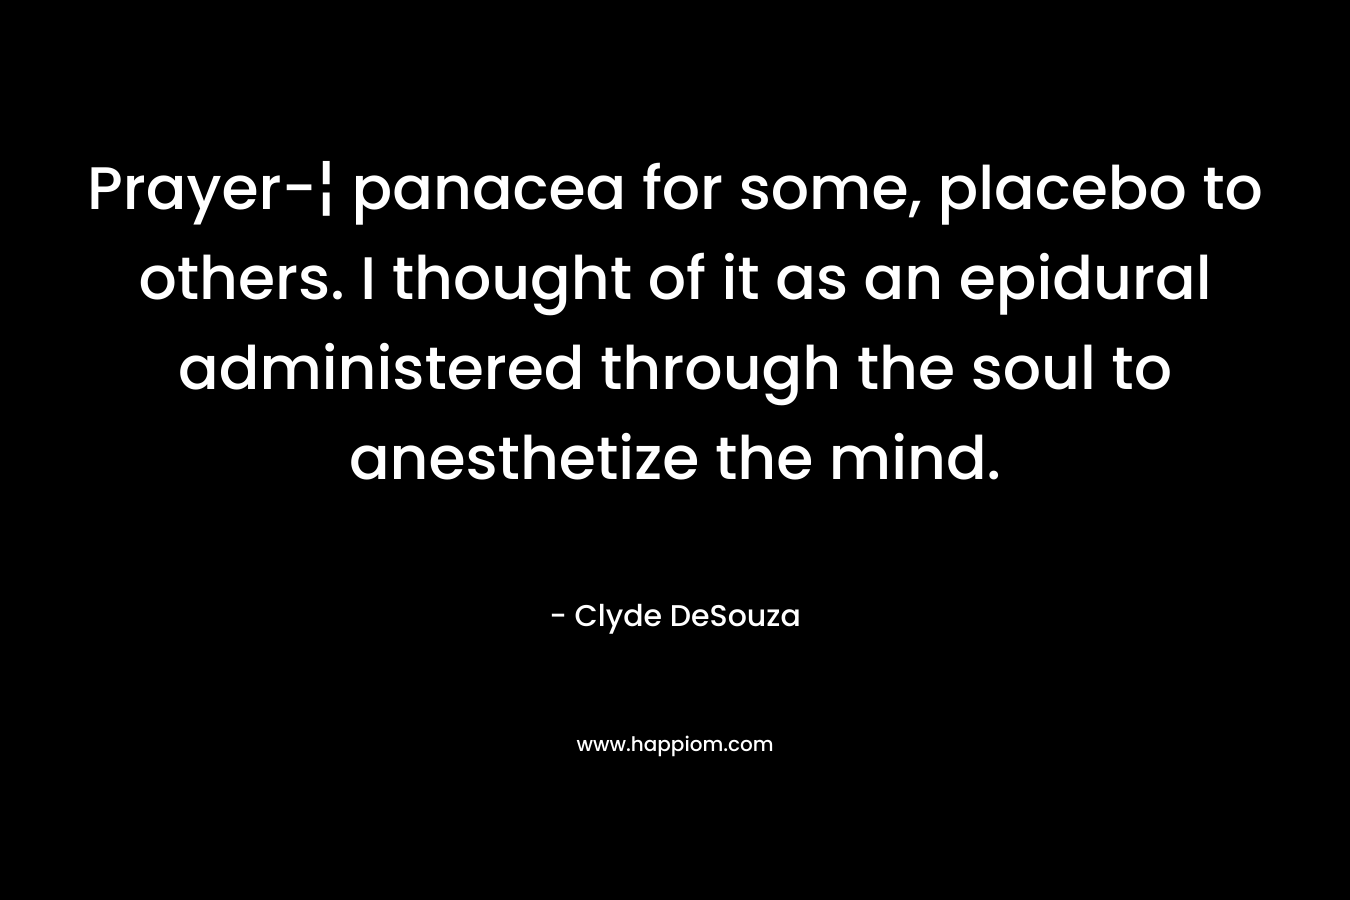 Prayer-¦ panacea for some, placebo to others. I thought of it as an epidural administered through the soul to anesthetize the mind.